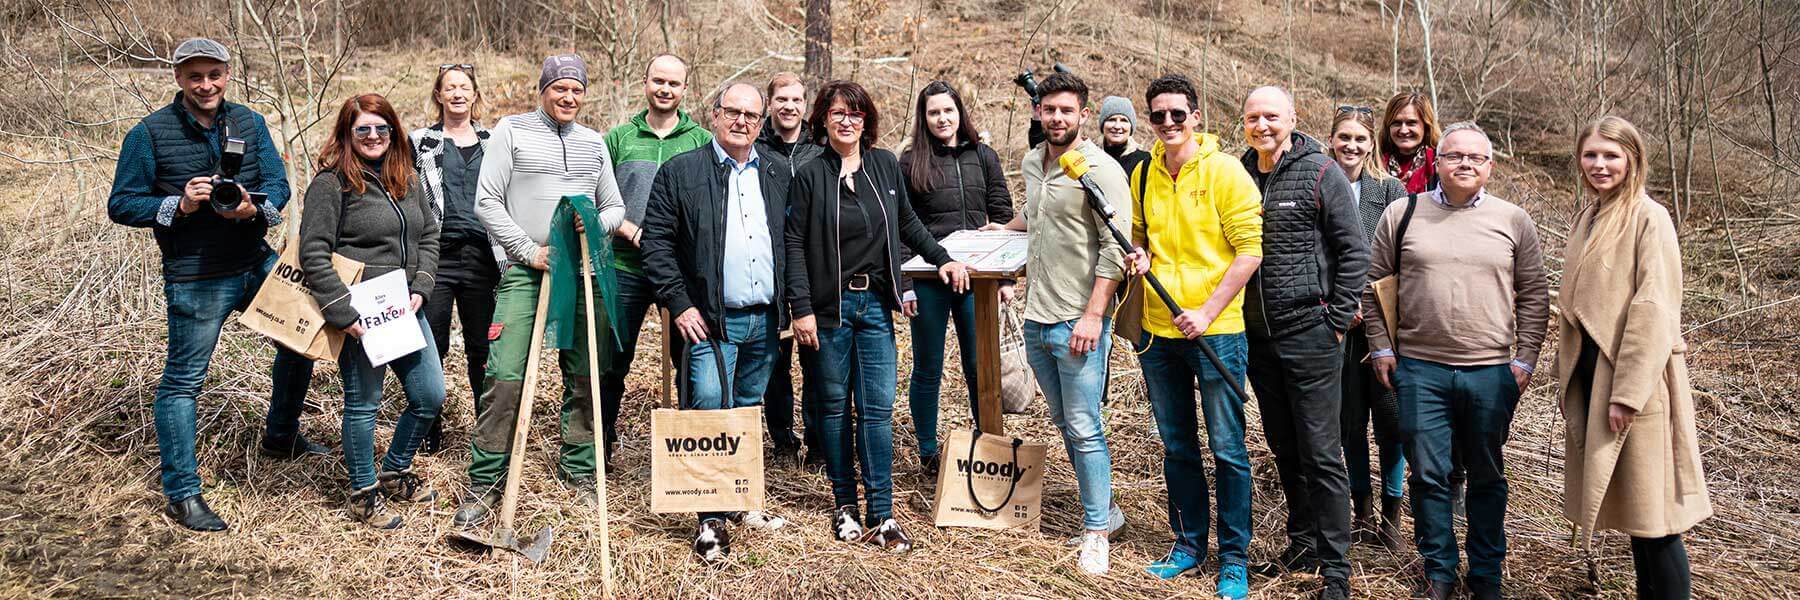 The woody reforestation  - giving something back to nature